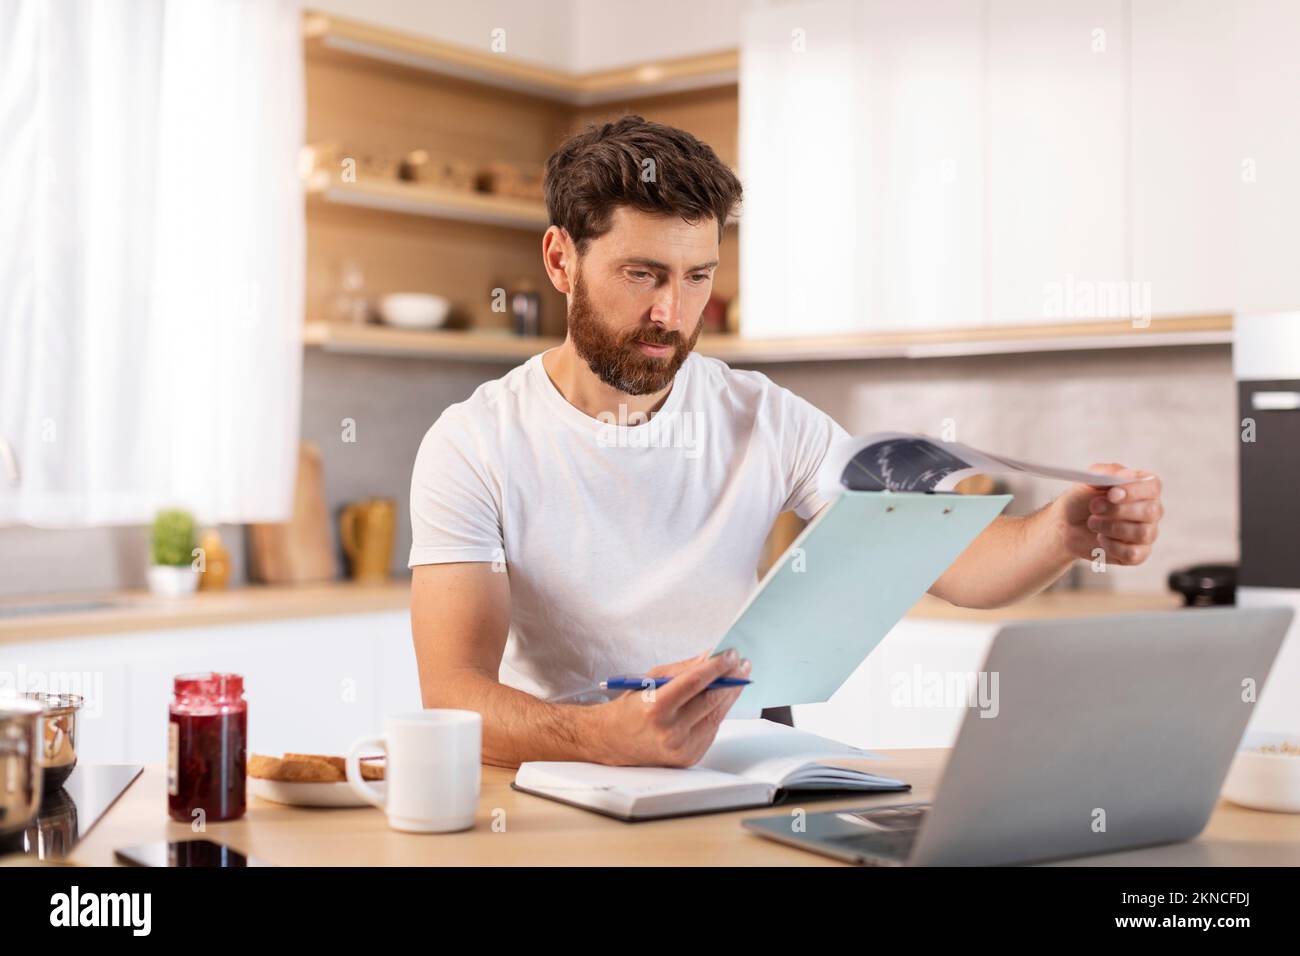 Serious adult caucasian male with beard works with documents and laptop in minimalist kitchen interior Stock Photo